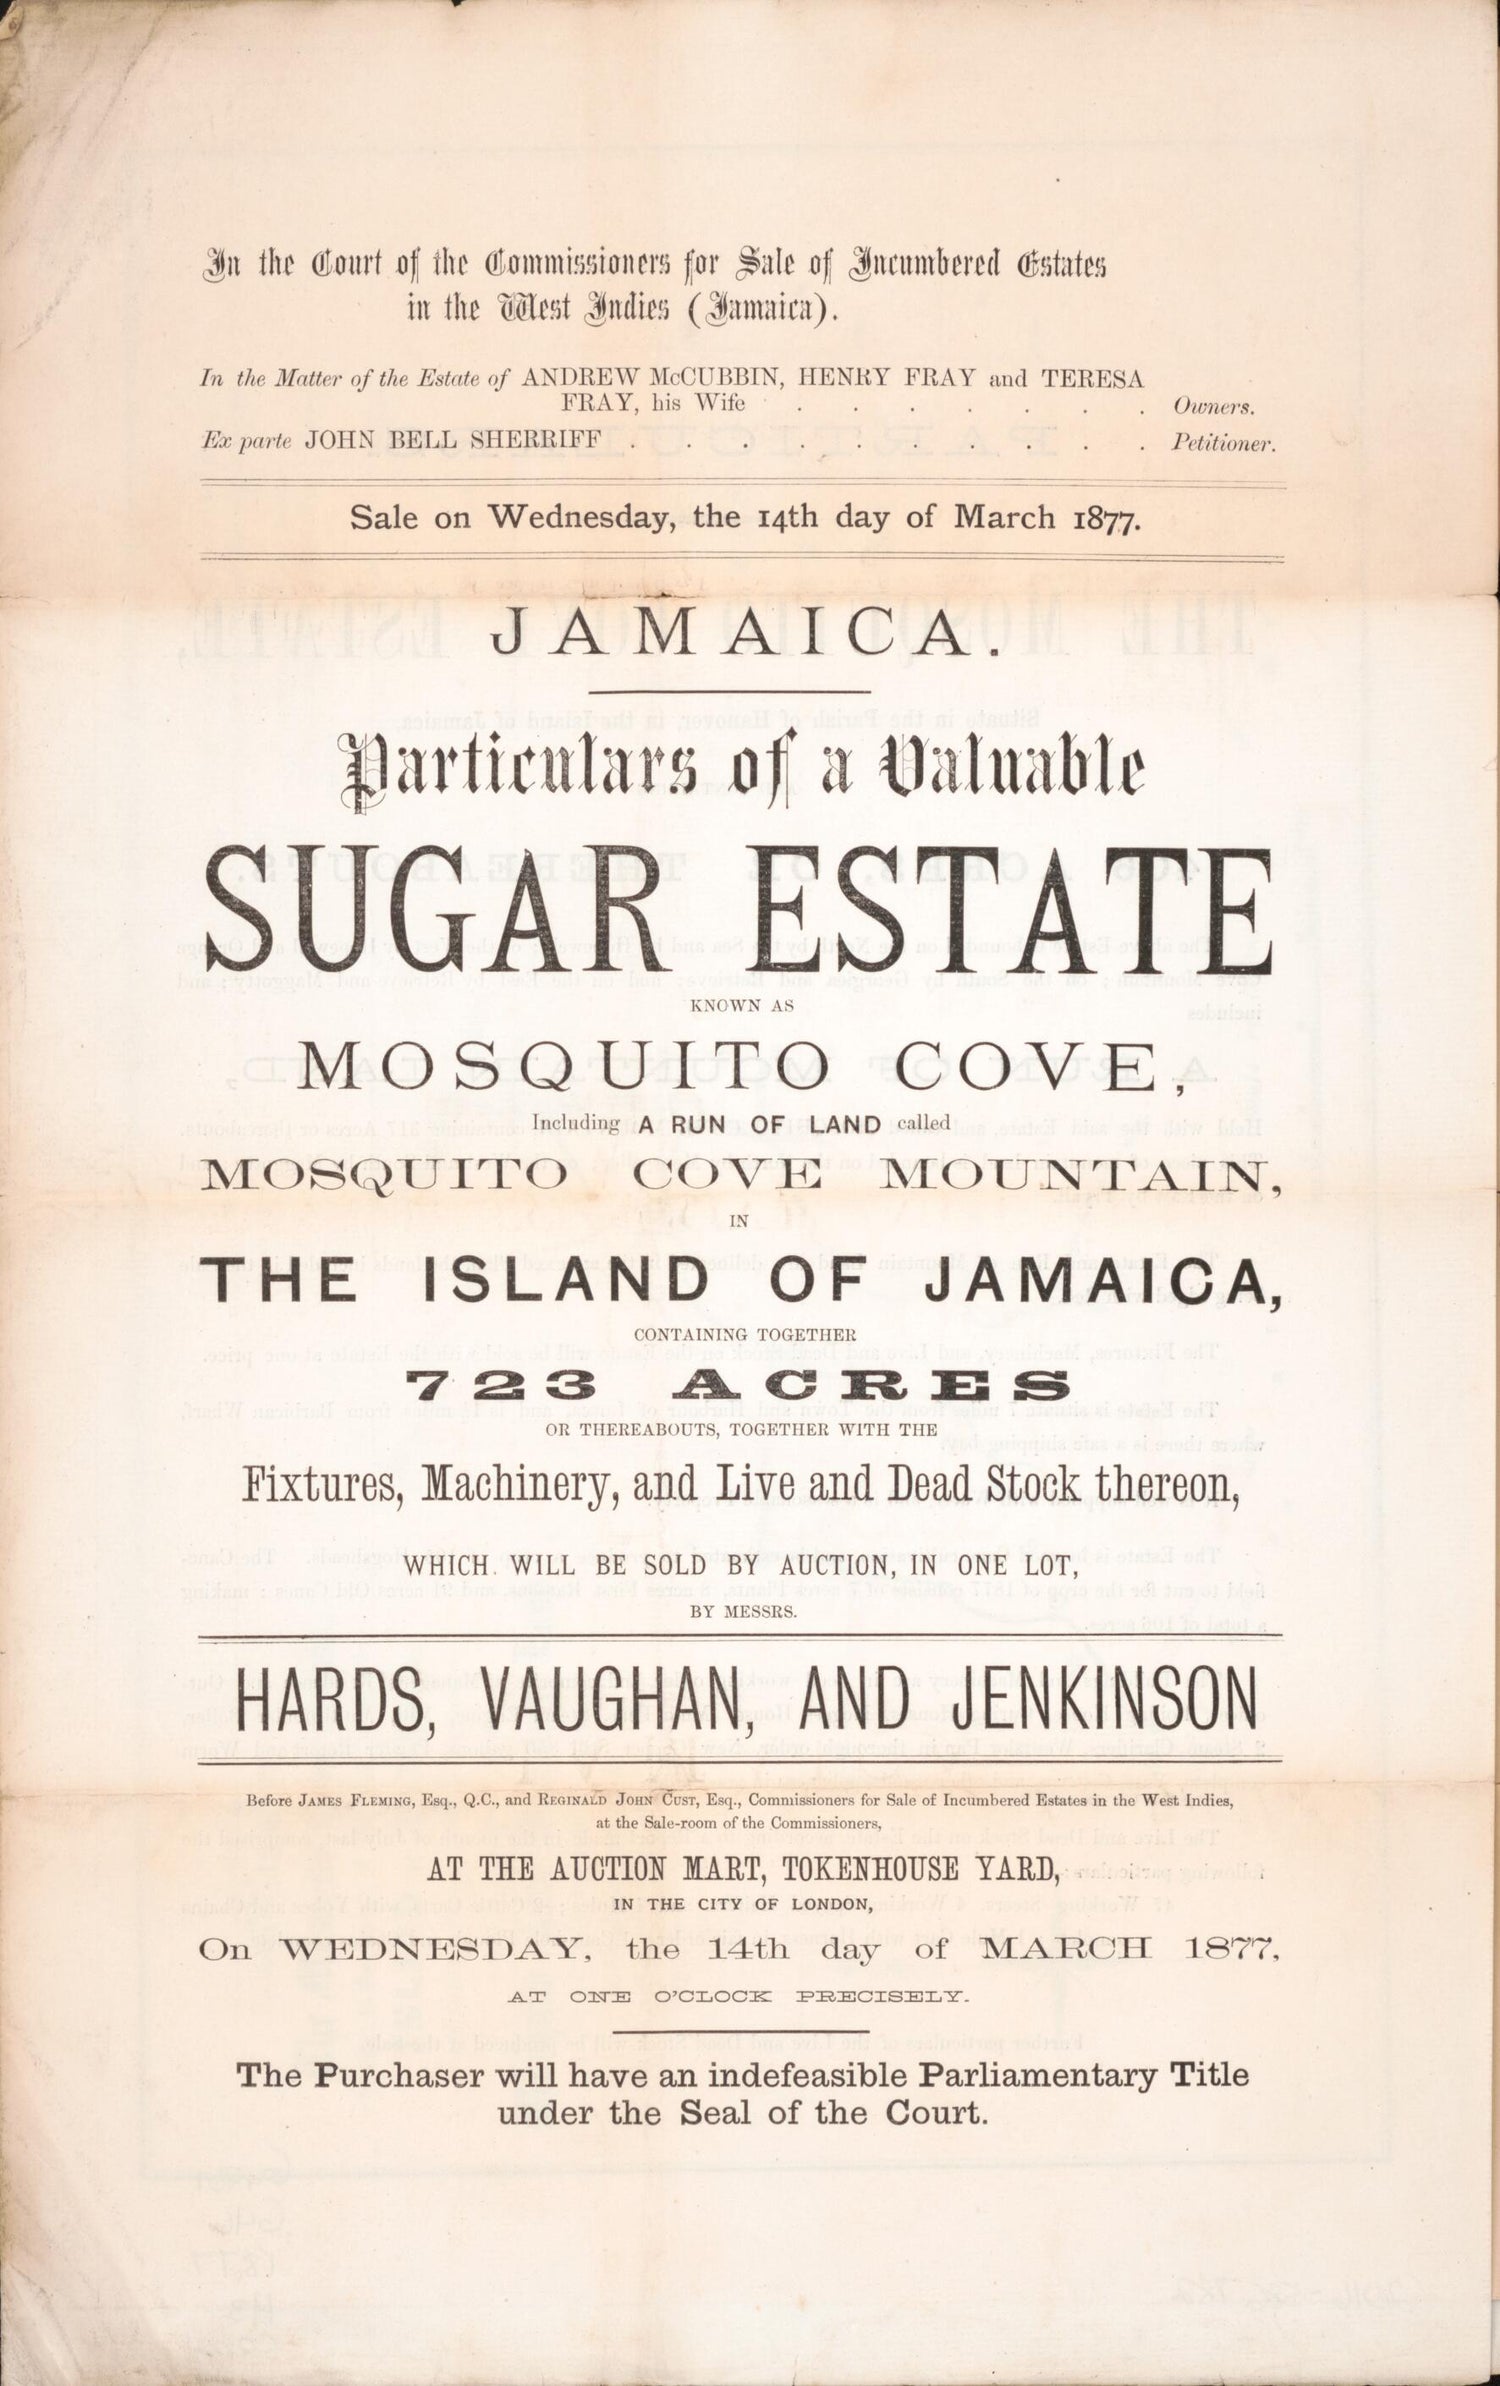 This old map of Jamaica, Particulars of a Valuable Sugar Estate : Known As Mosquito Cove, Including a Run of Land Called Mosquito Cove Mountain, In the Island of Jamaica, Containing Together 723 Acres, Or Thereabouts, Together With the Fixtures, Machiner